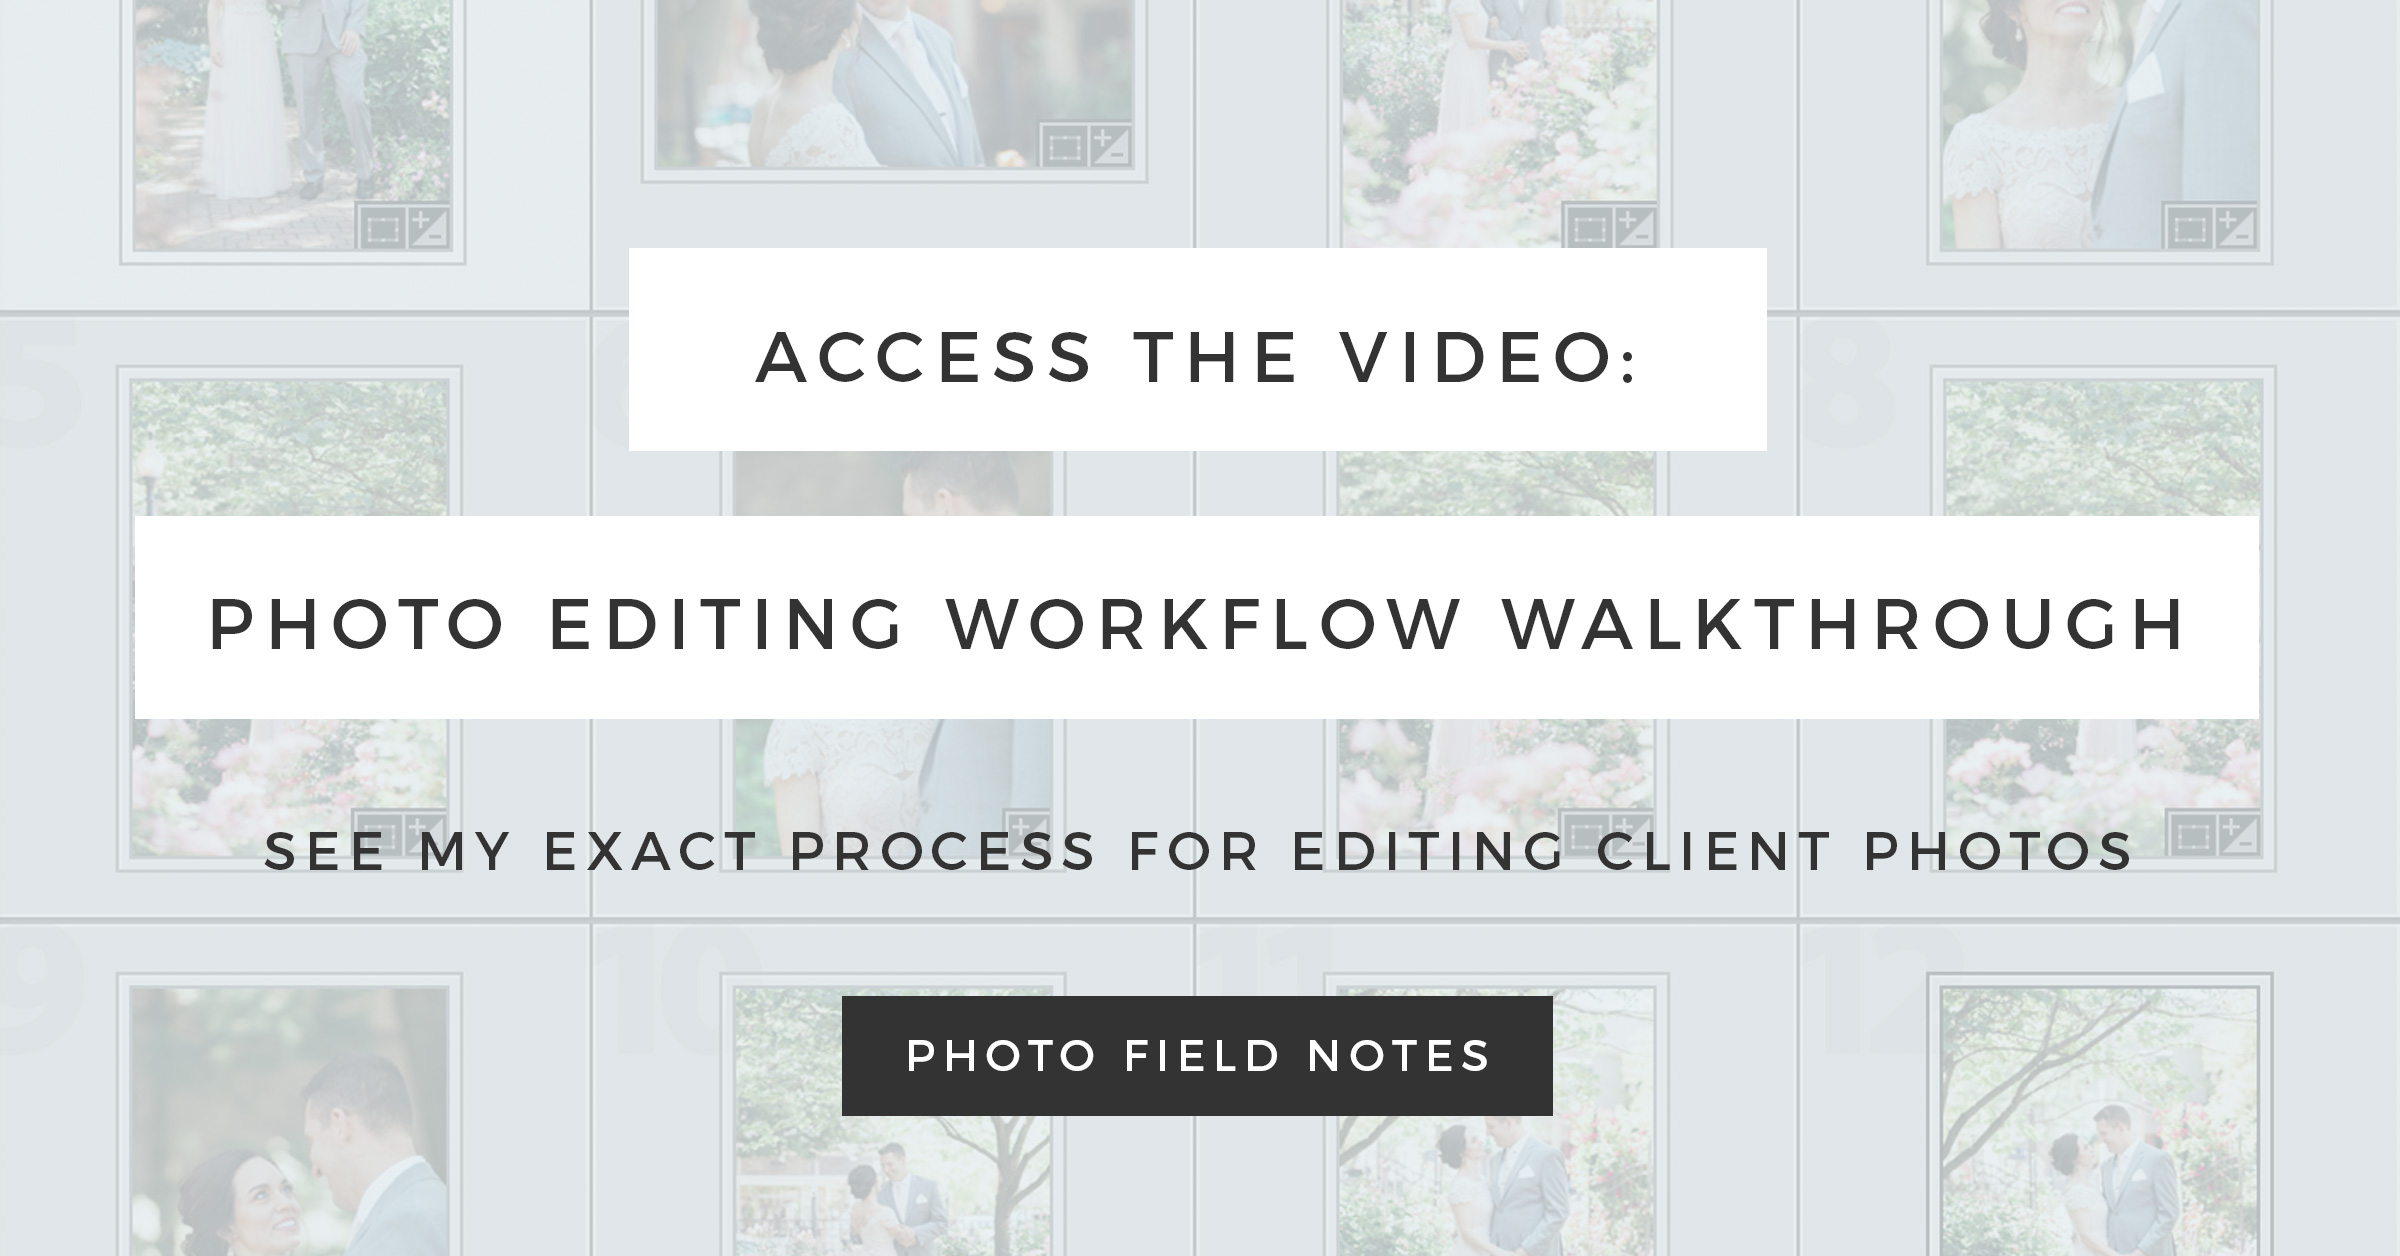 Access the video: photo editing workflow walkthrough (see my exact process for editing client photos)